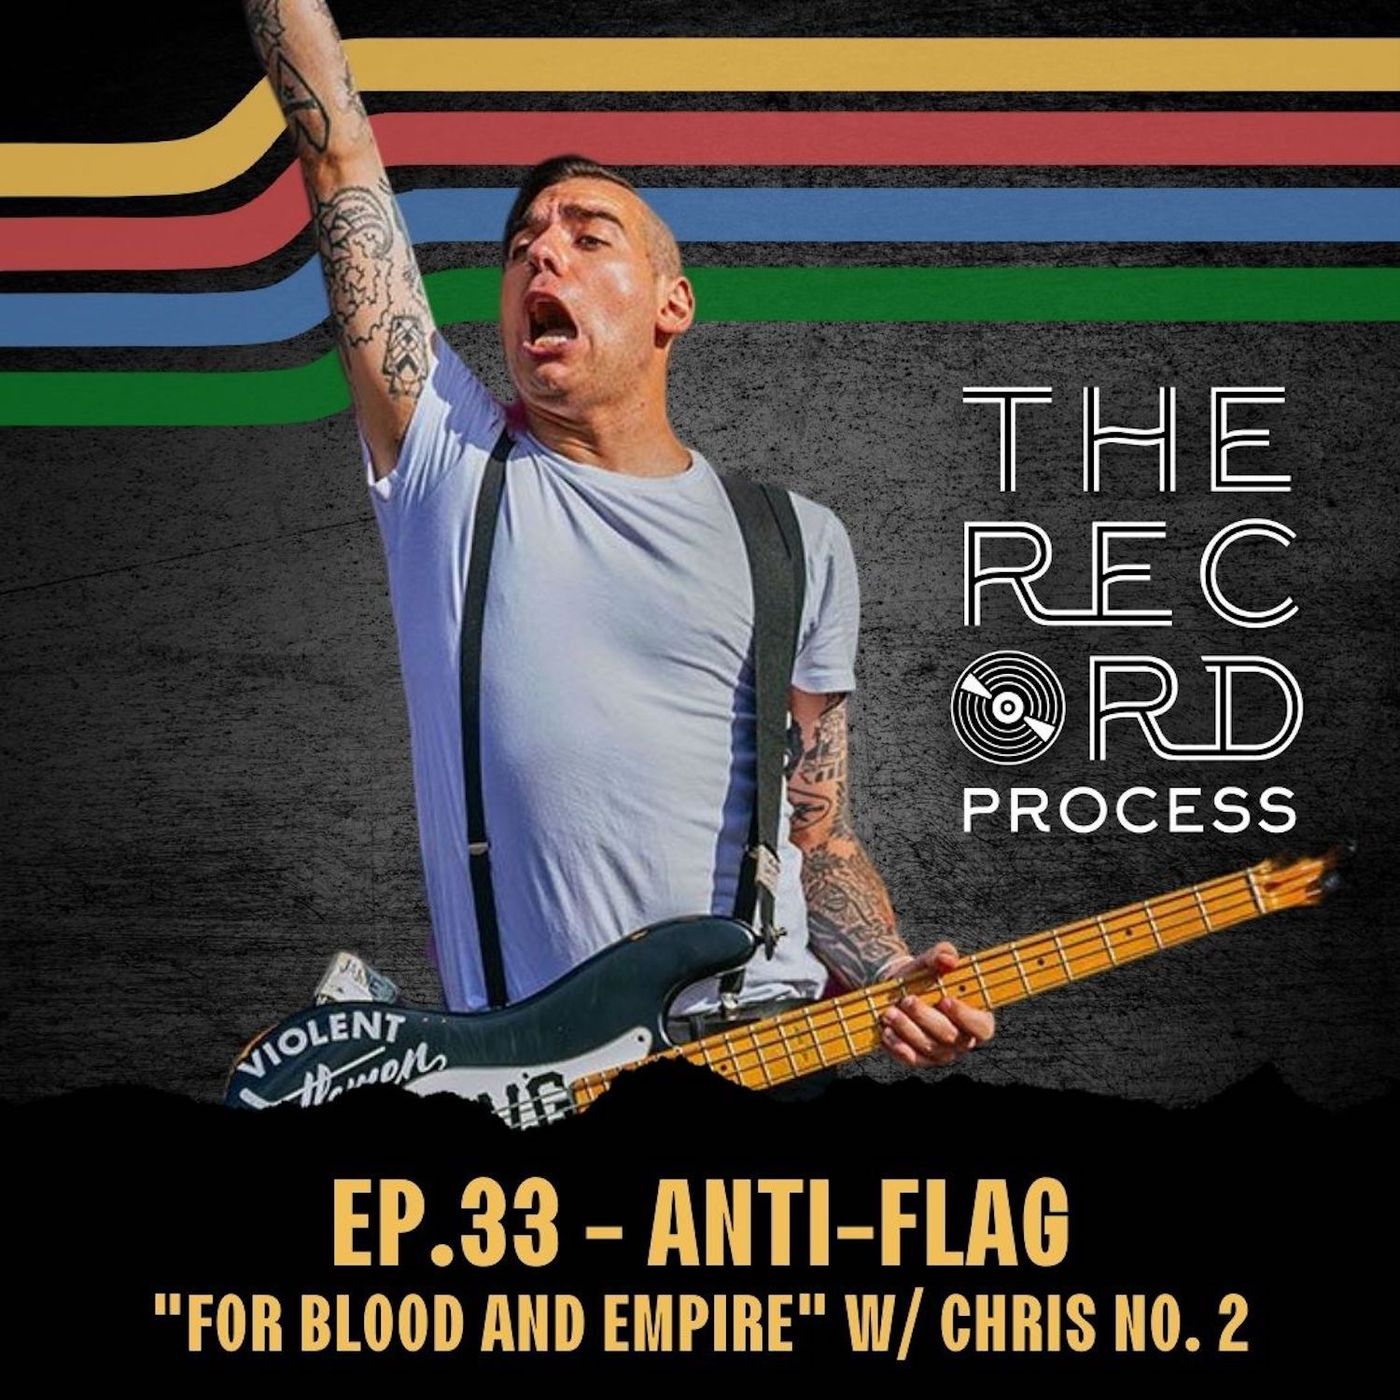 EP. 33 - ”For Blood And Empire” by Anti-Flag with Chris No.2